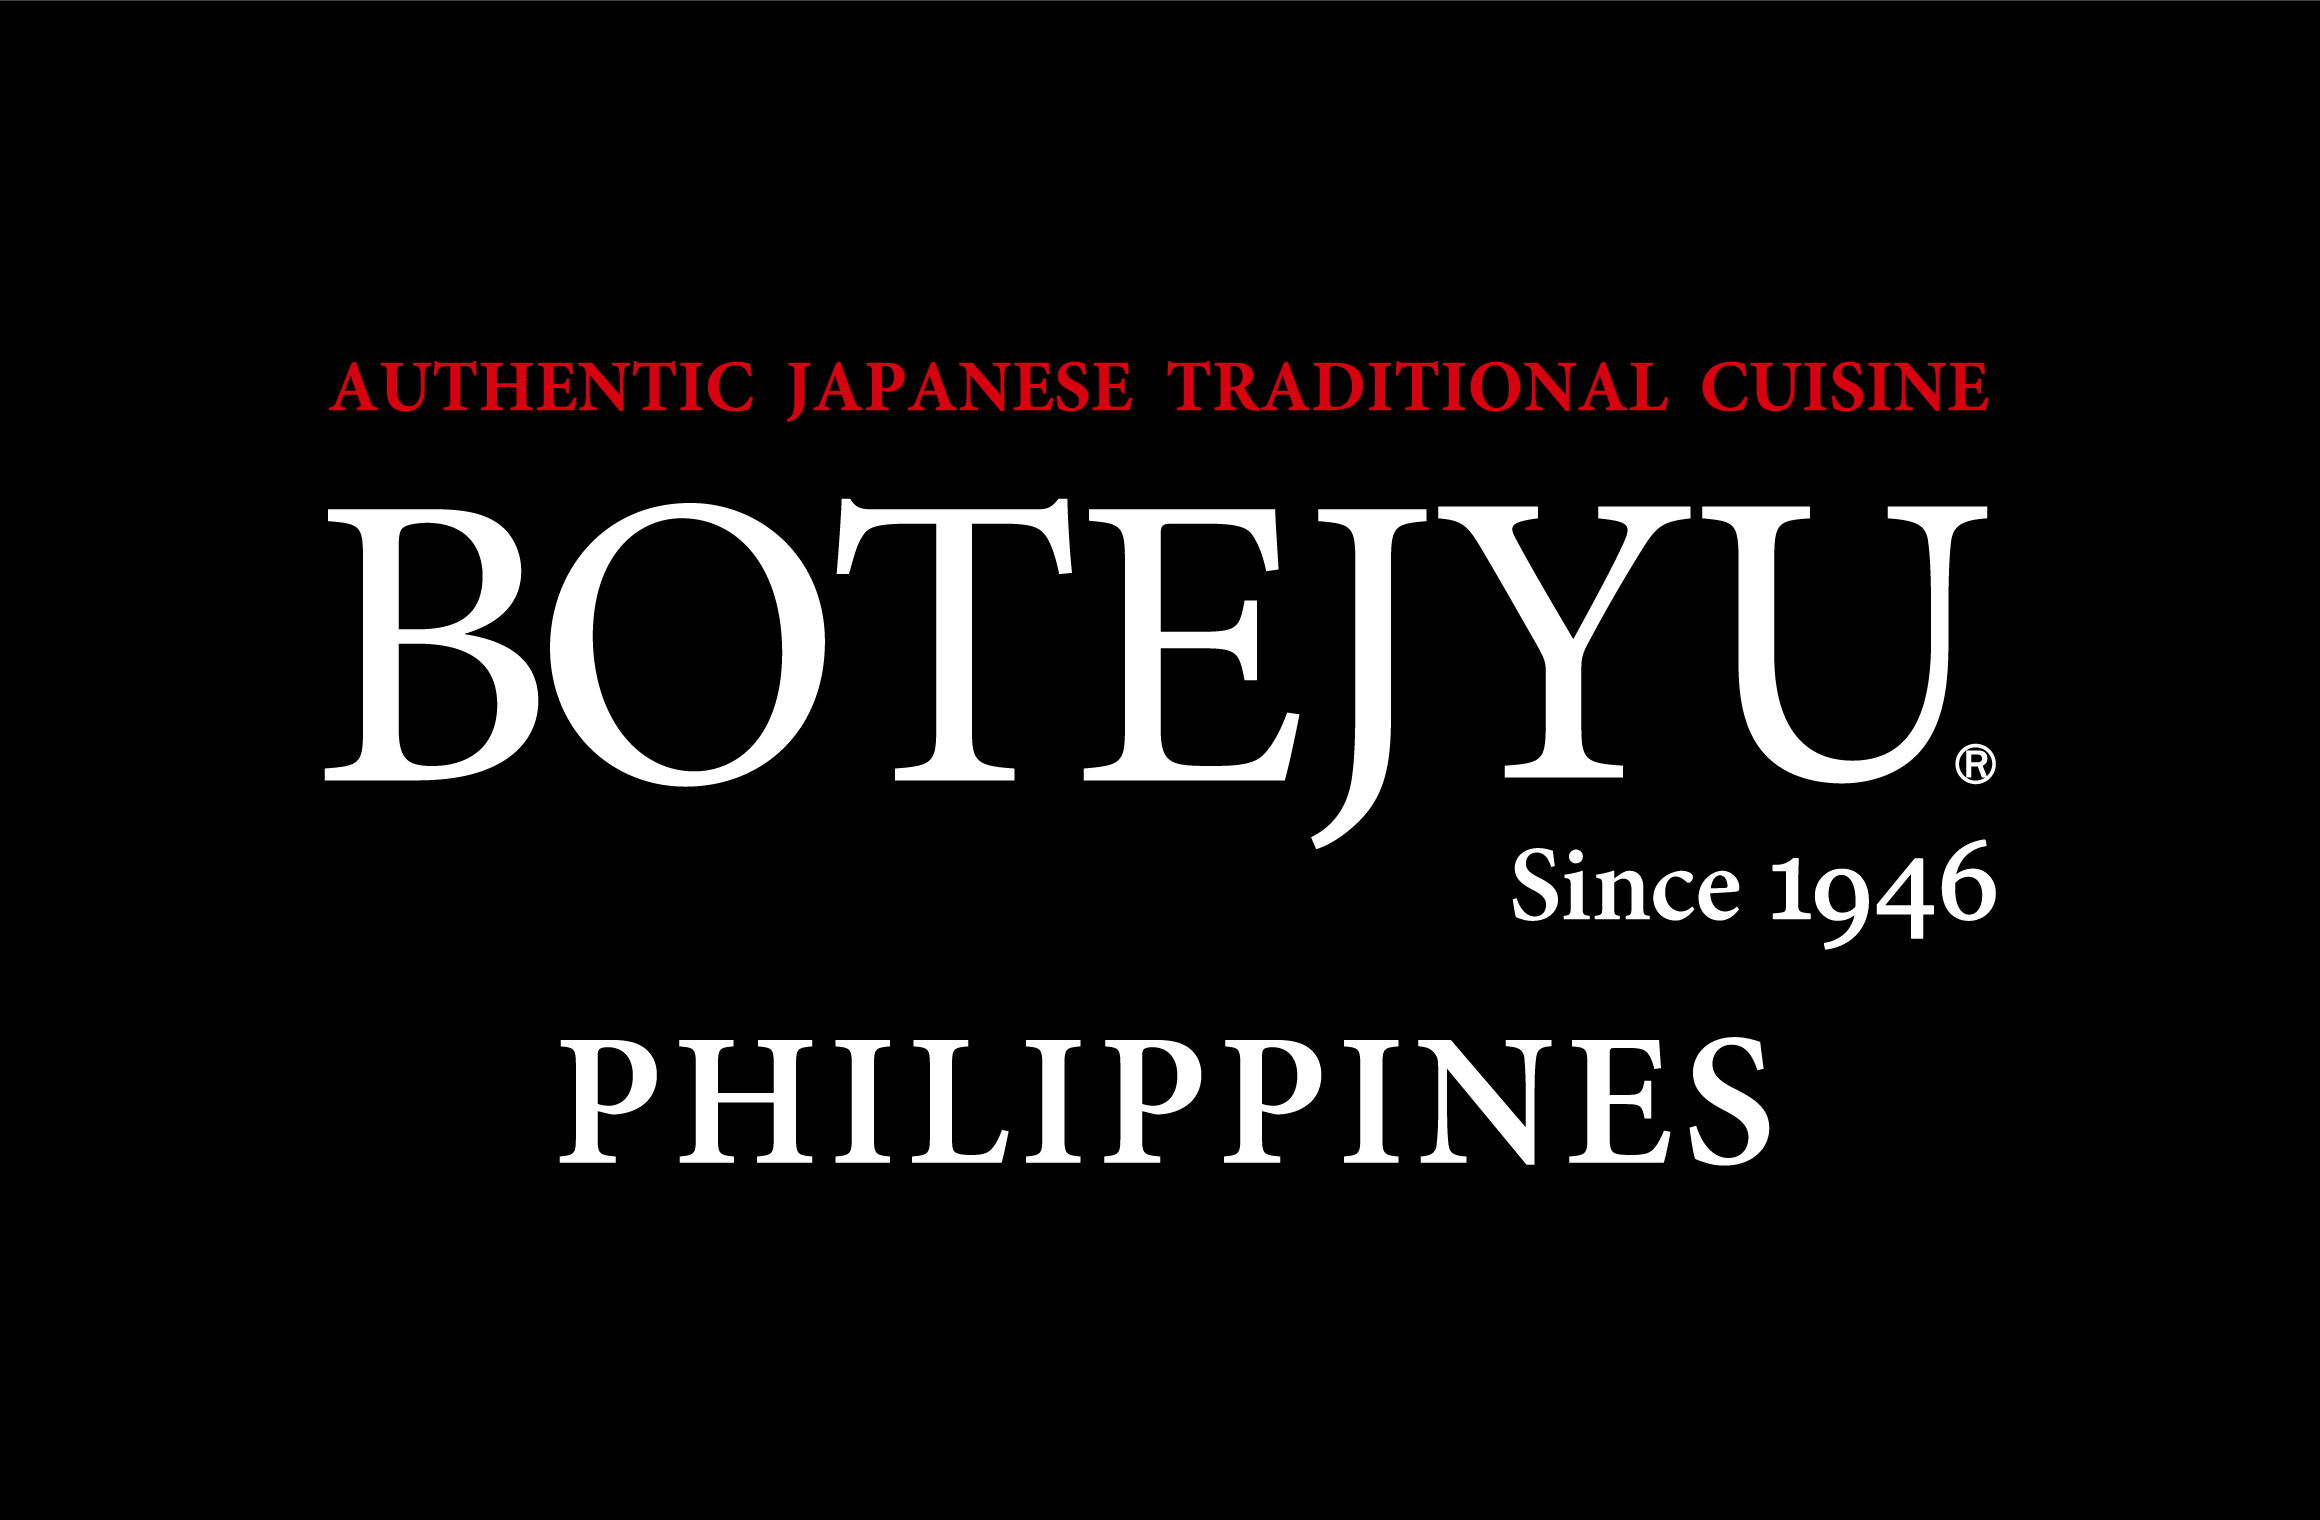 「BOTEJYU® Philippines 58 / Robinsons Place Santiago」: オープン致します。